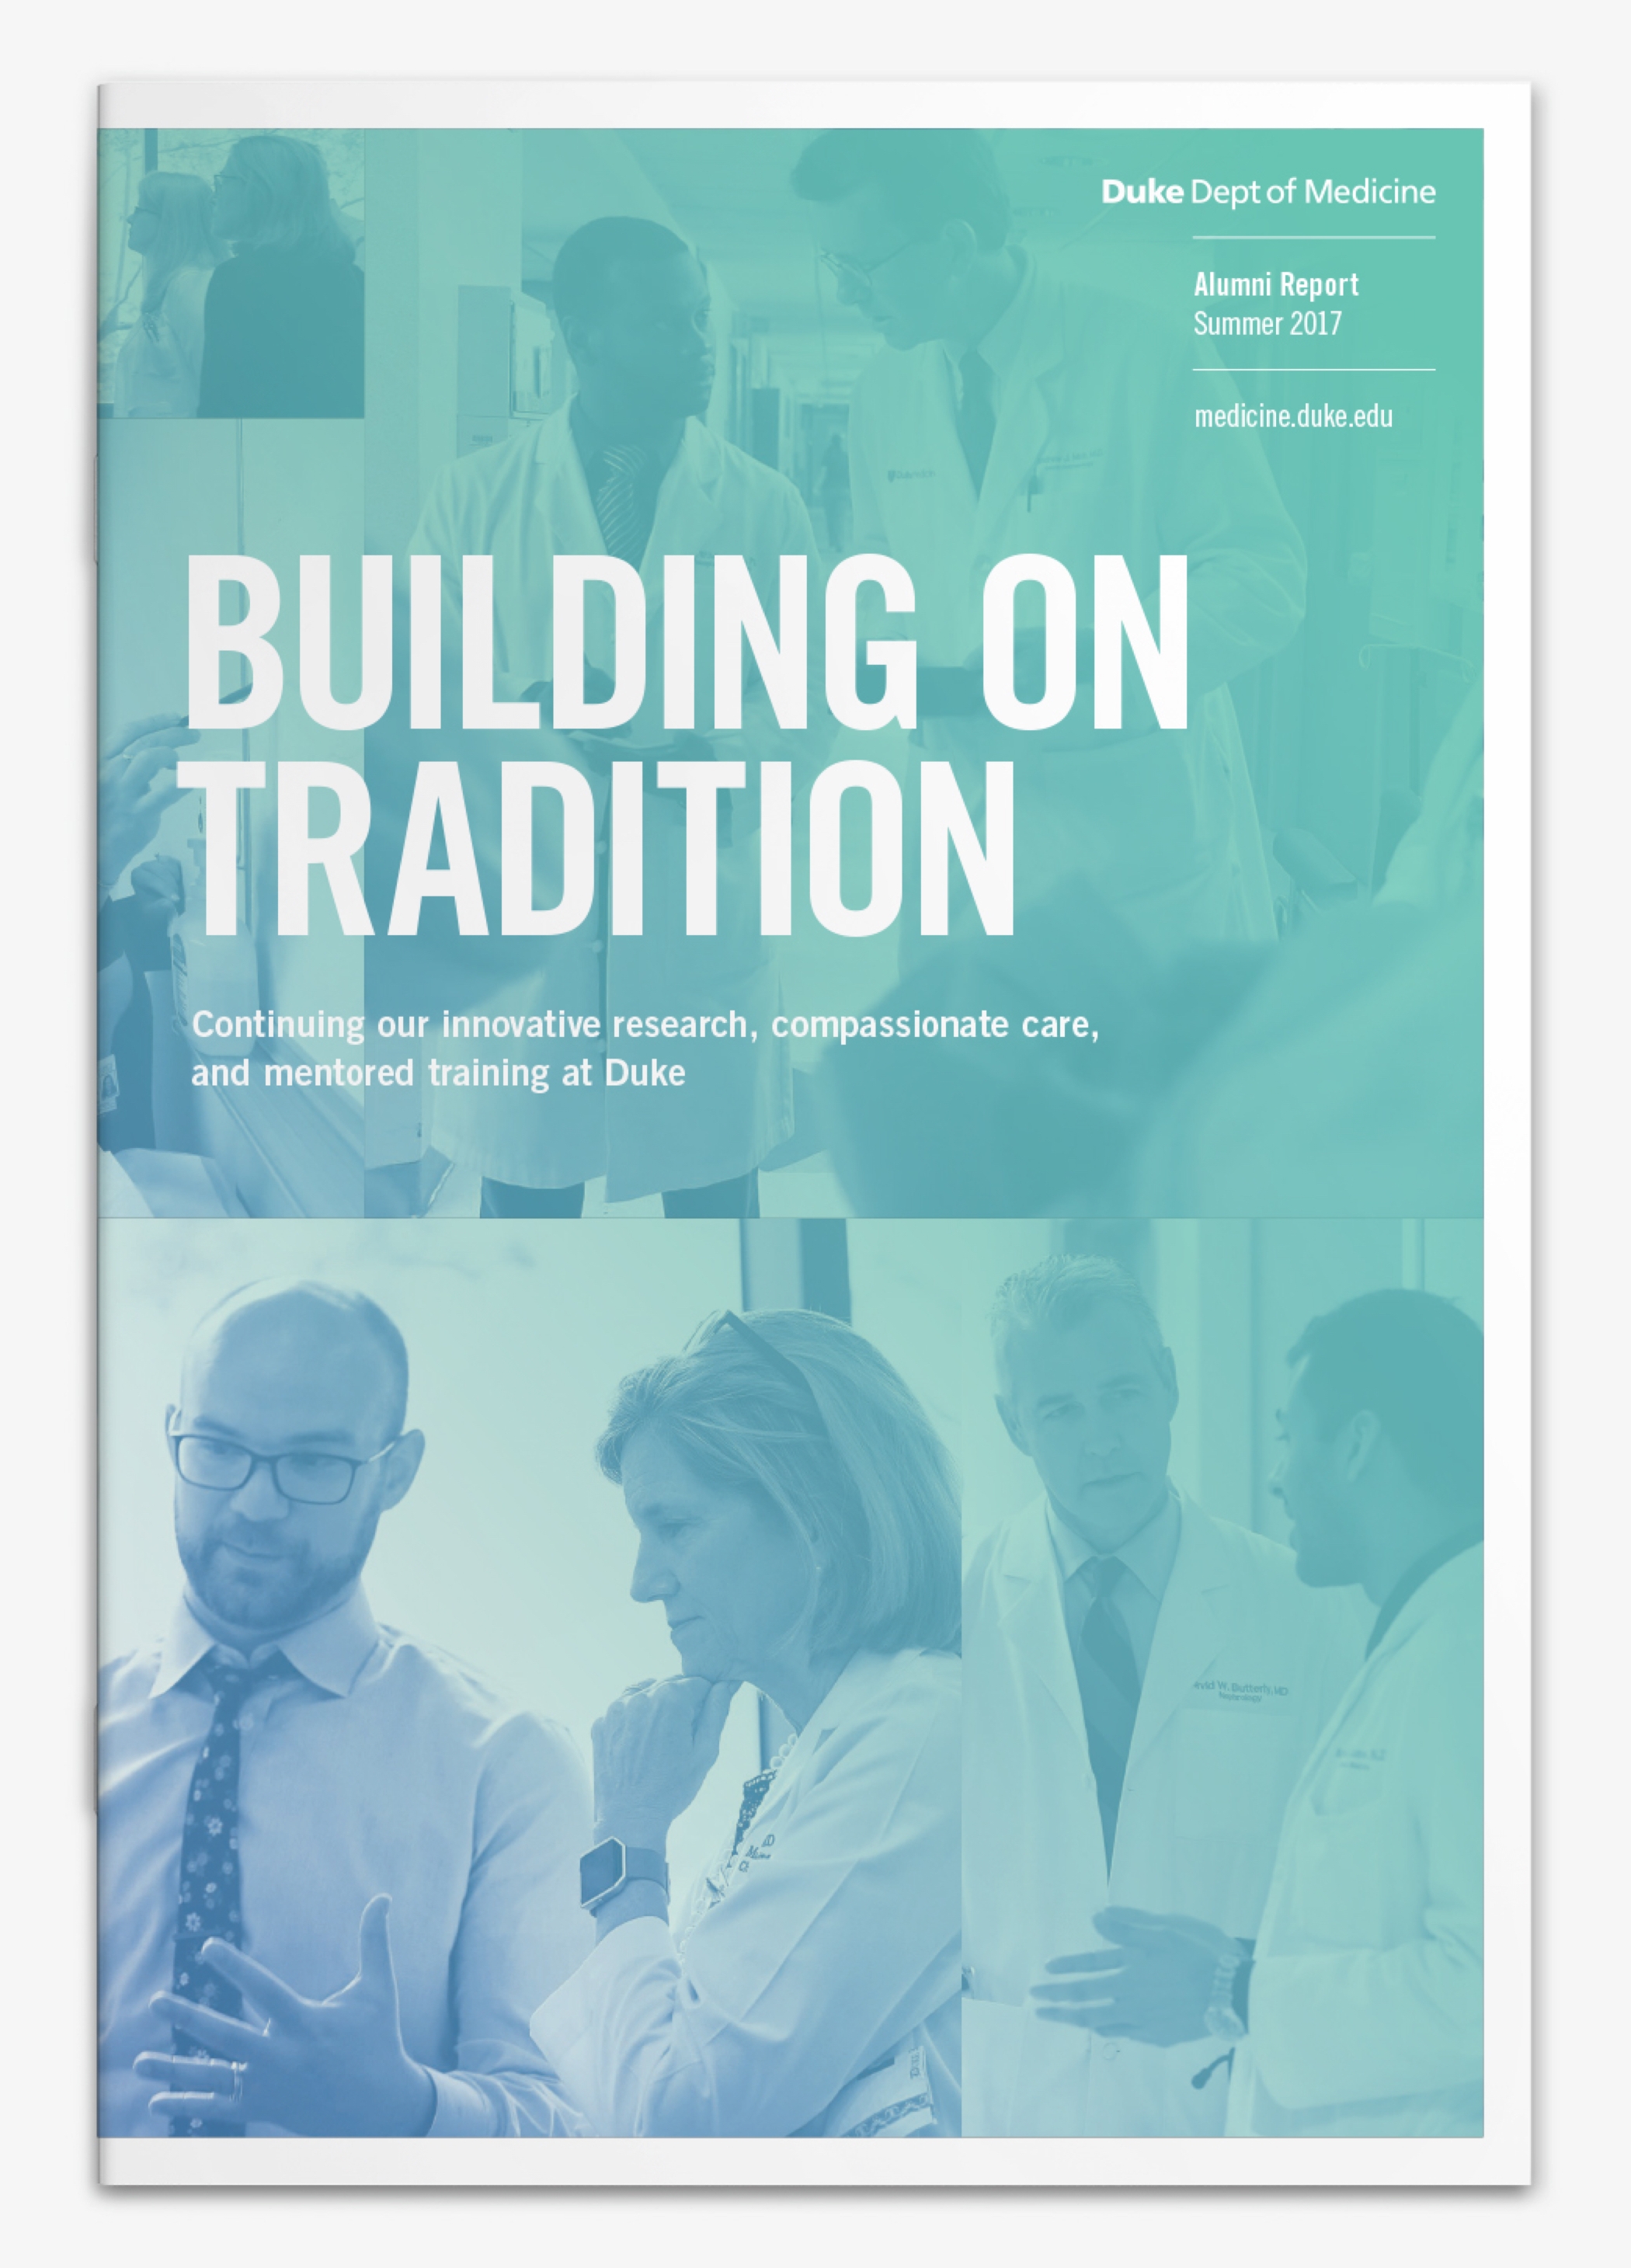 Cover of the Duke University Department of Medicine 2017 Alumni Report, entitled "Building On Tradition."